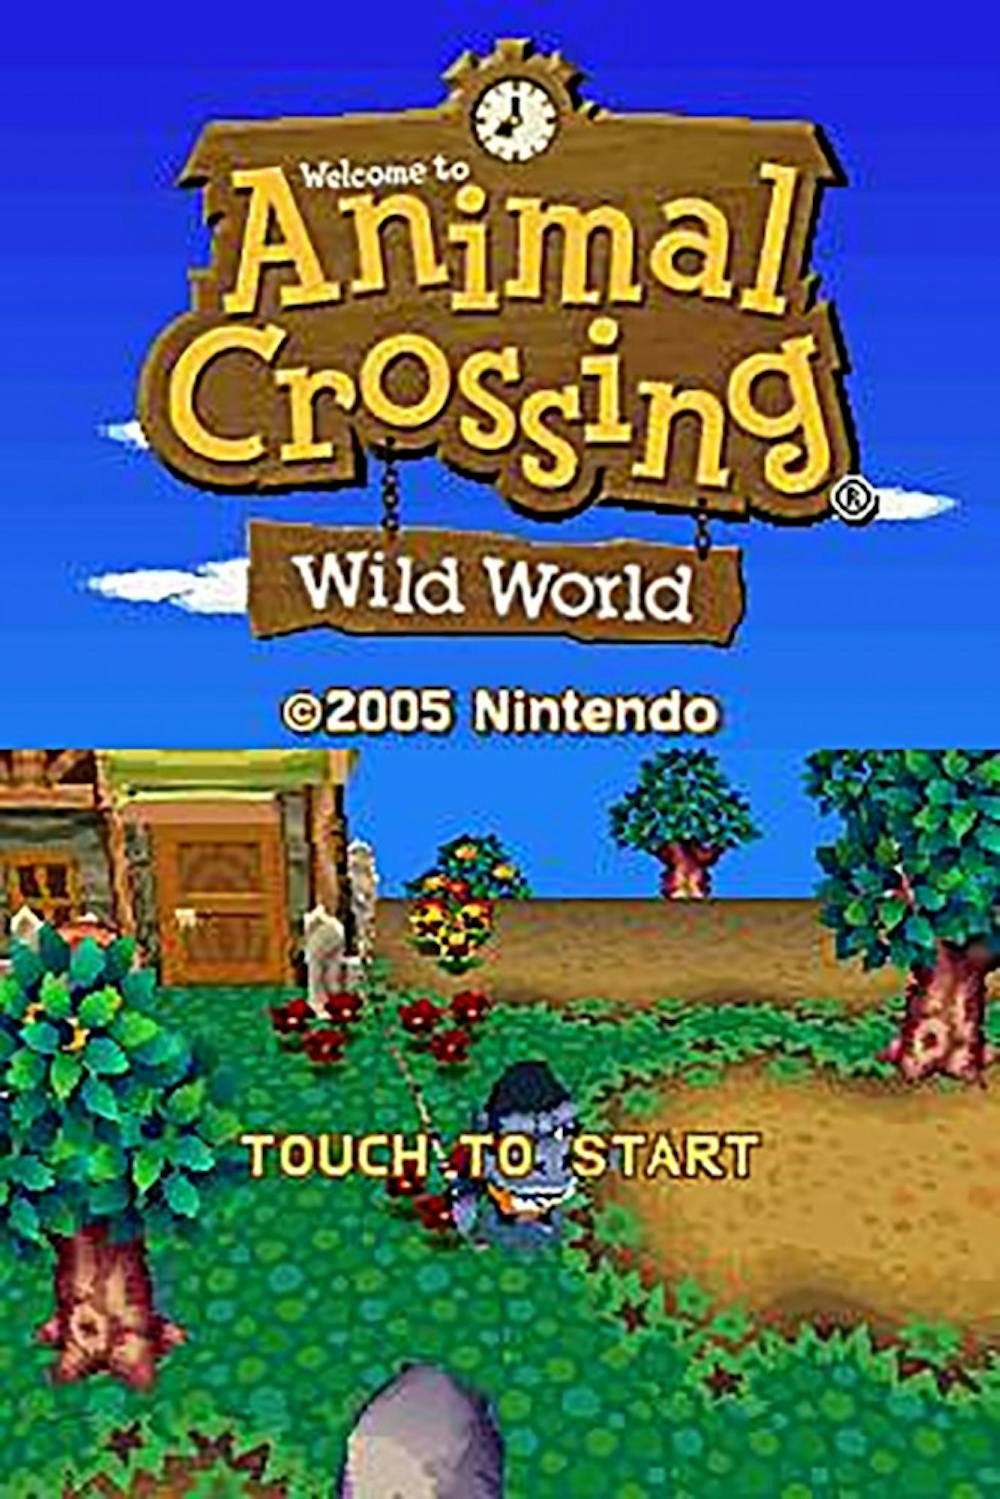 <p>"Animal Crossing: Wild World" introduced kids to their future: debt, fledgling friendships and endless menial jobs. But it also revealed having fun despite these adult hardships.</p>